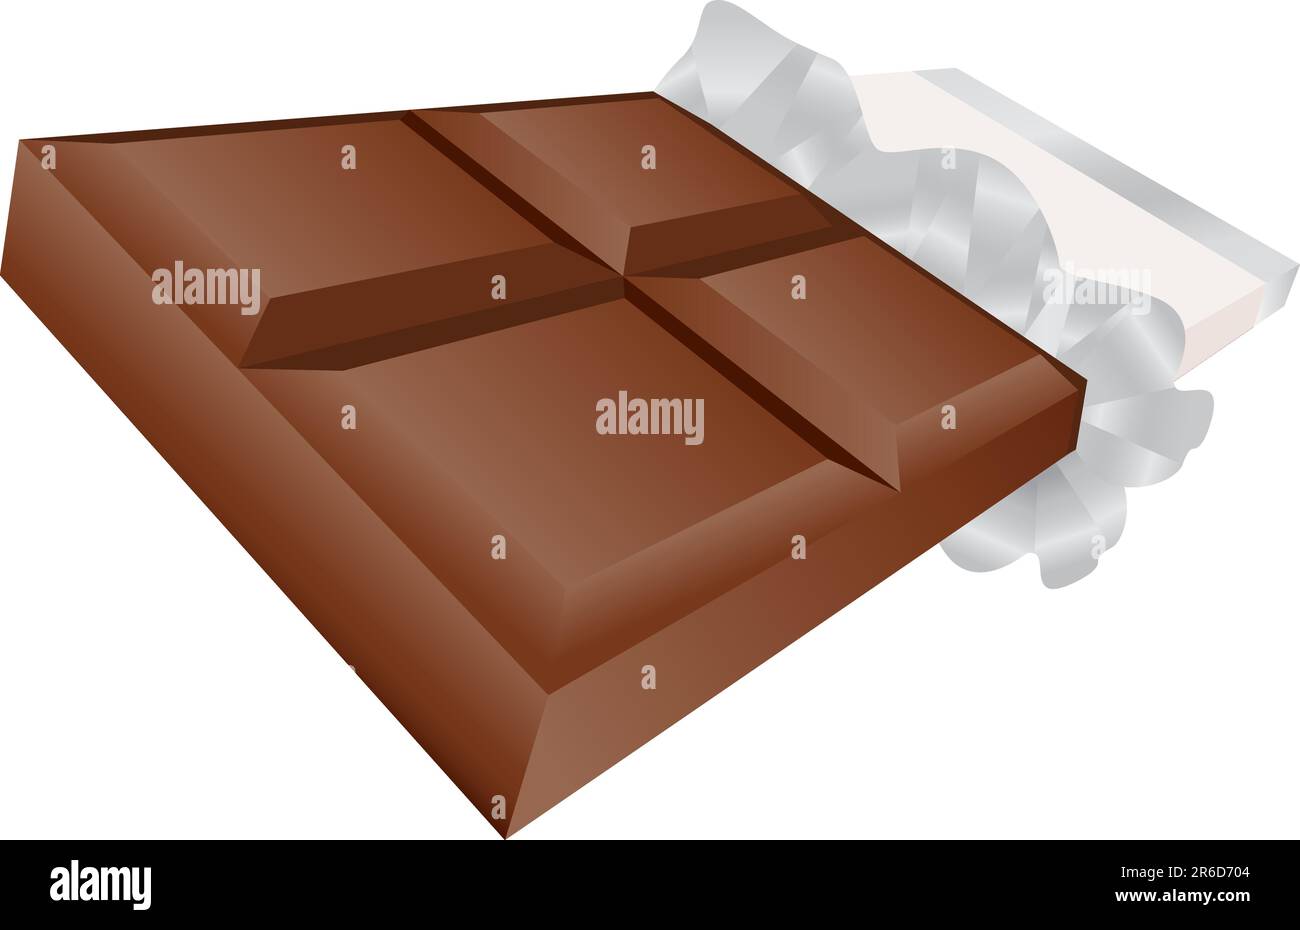 Realistic 3D chocolate candy bar wrapped in foil and paper wrapper. Stock Vector